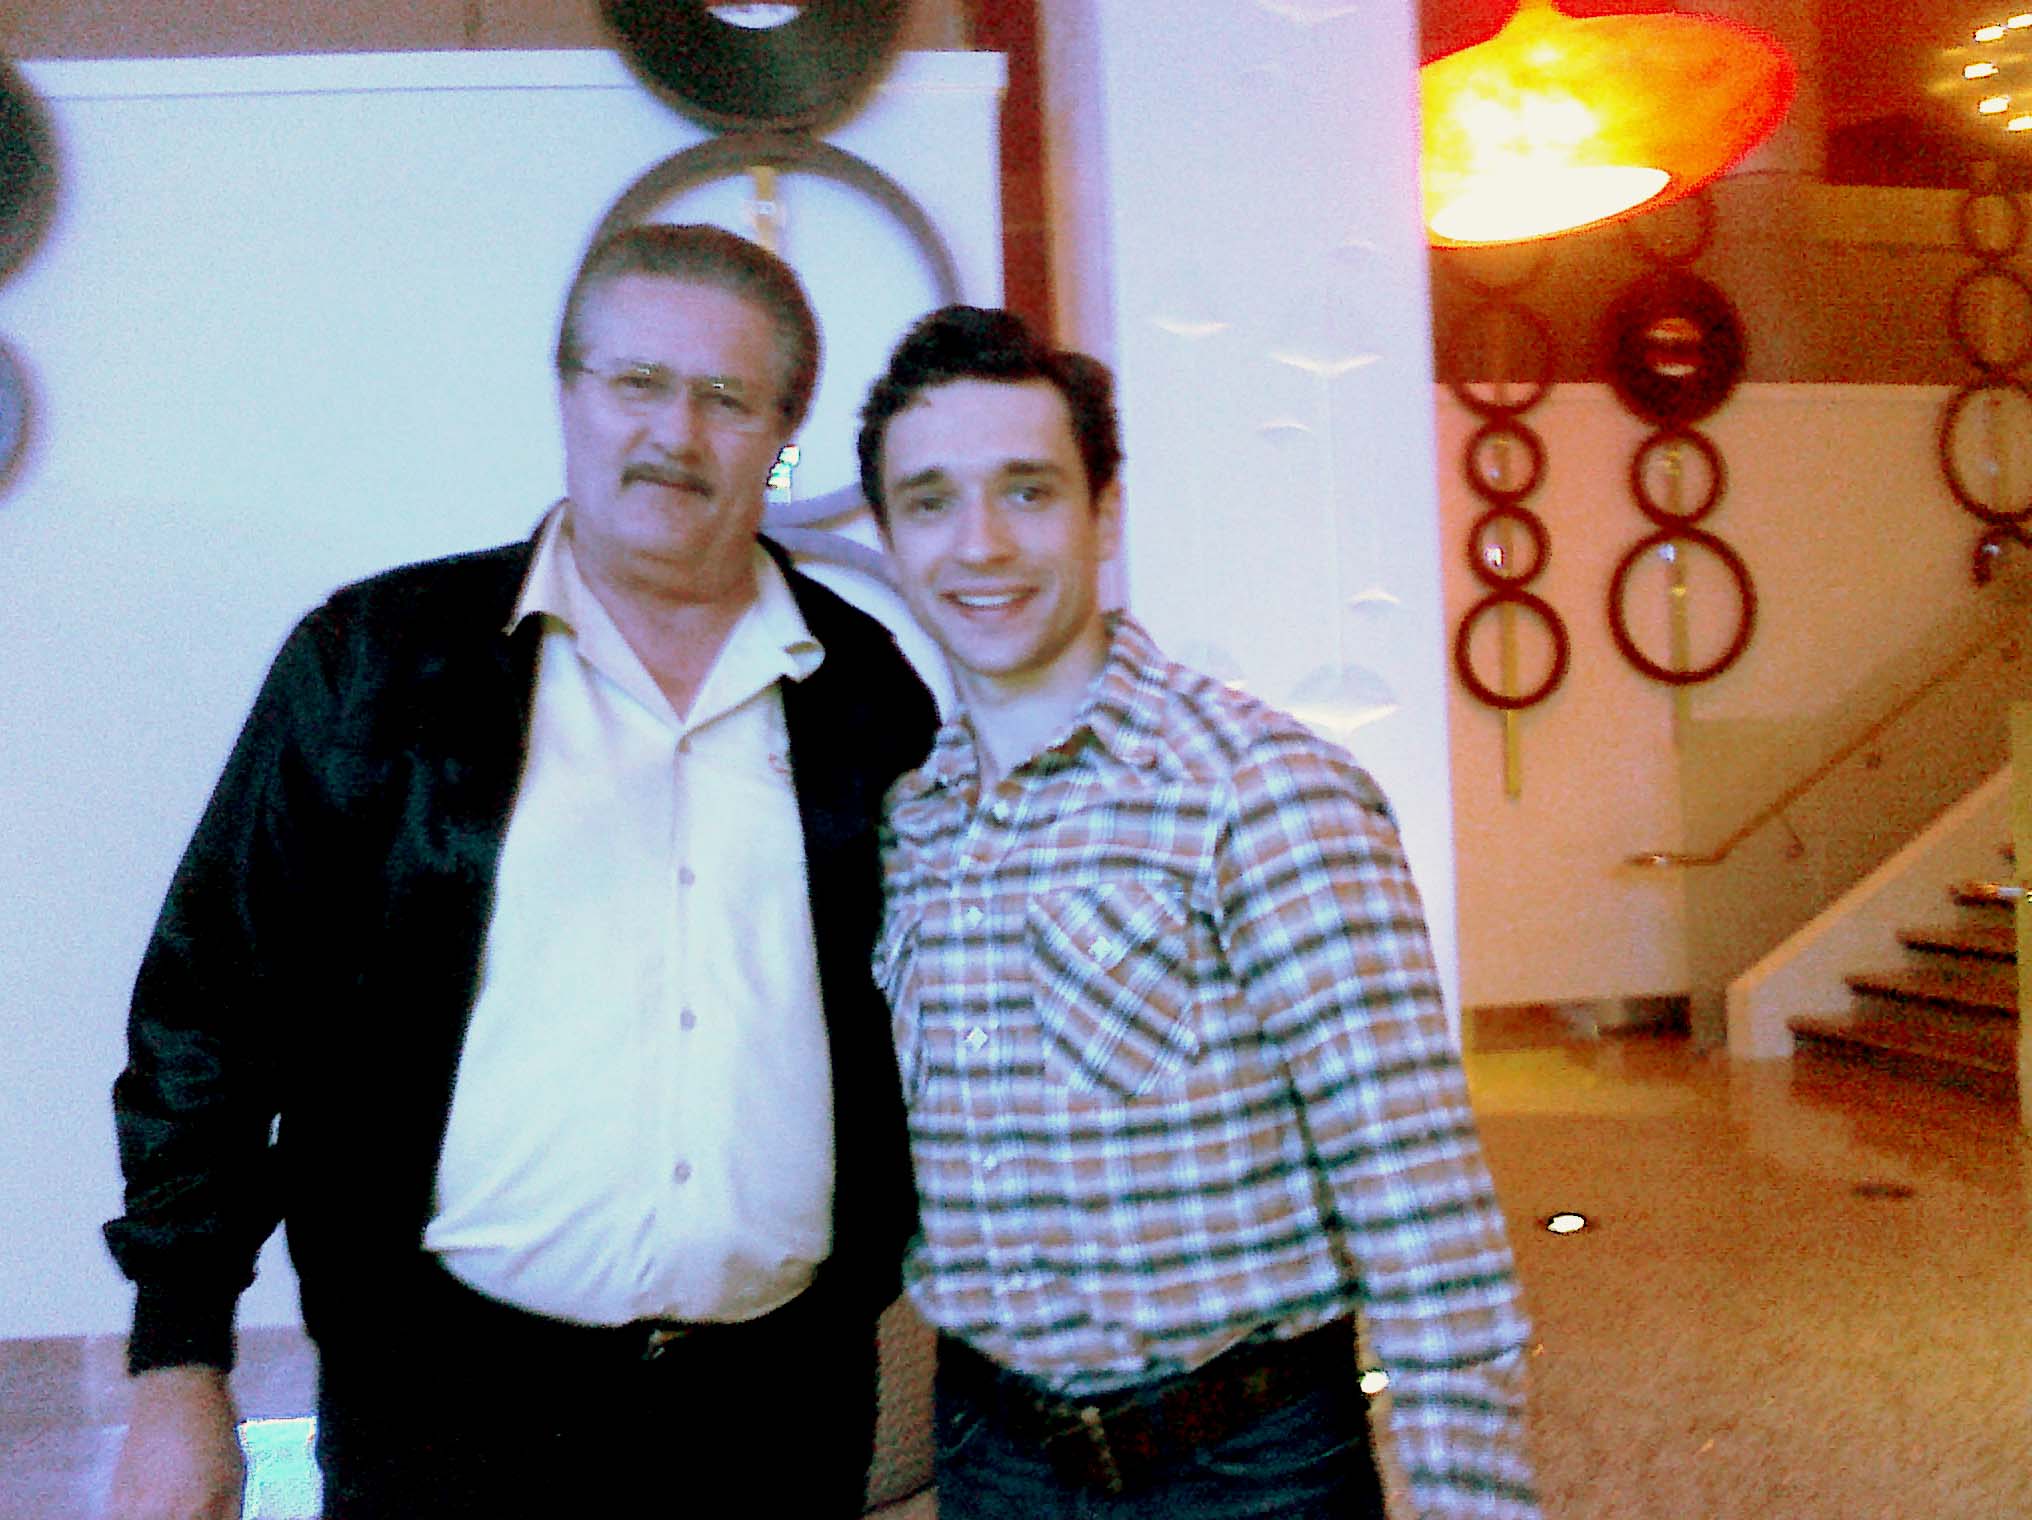 Robert with Rick Faugno who played Frankie Vallii the Las Vegas Production of the 